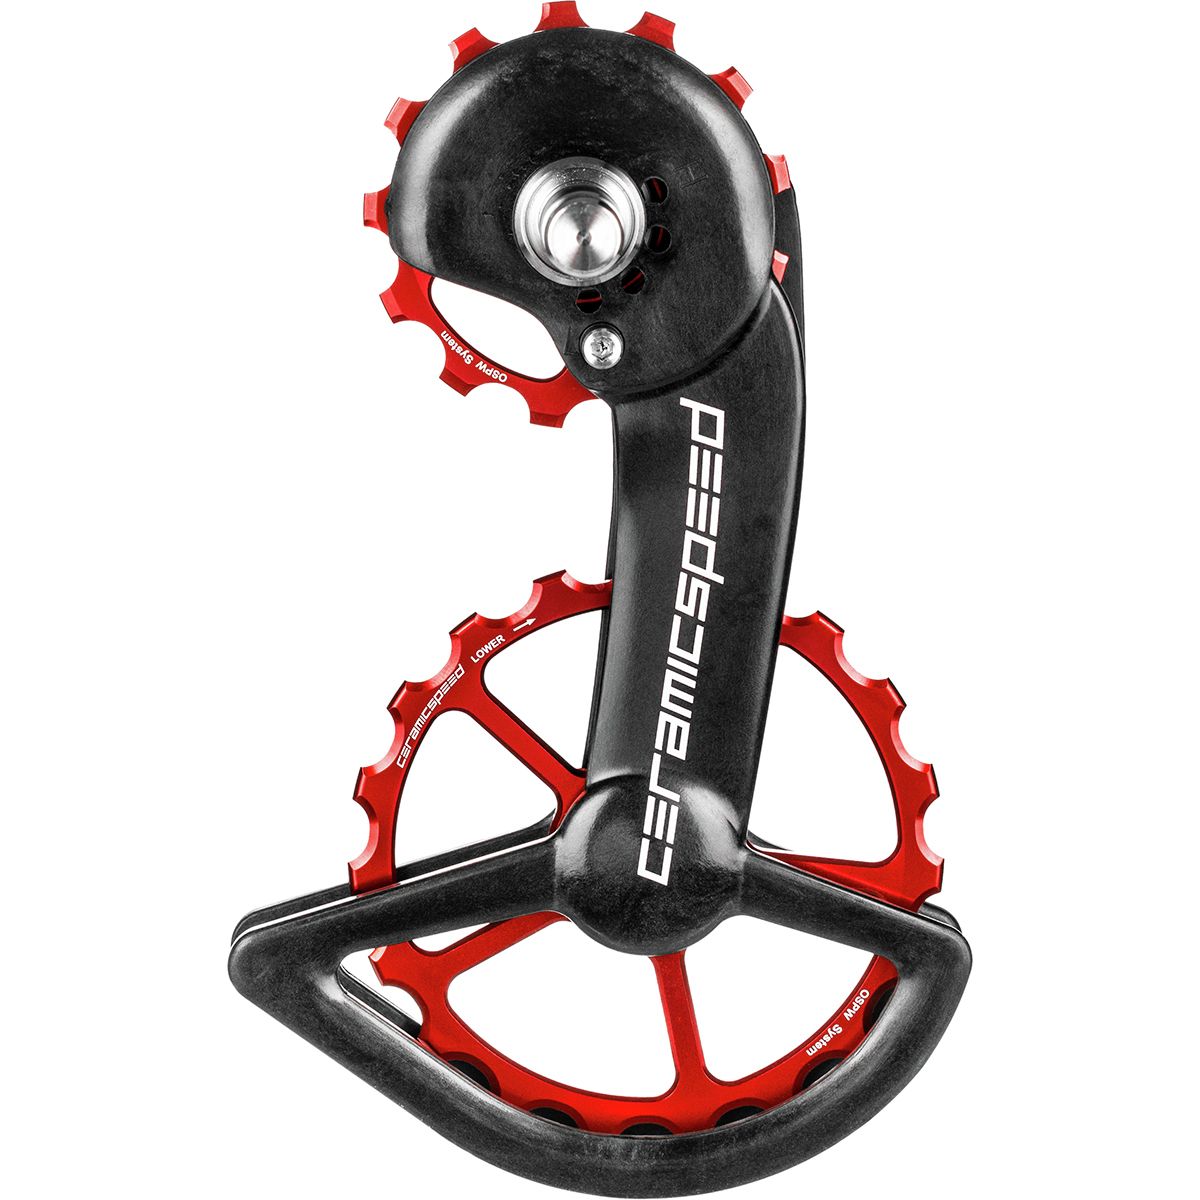 CeramicSpeed Oversized Pulley Wheel System - Coated